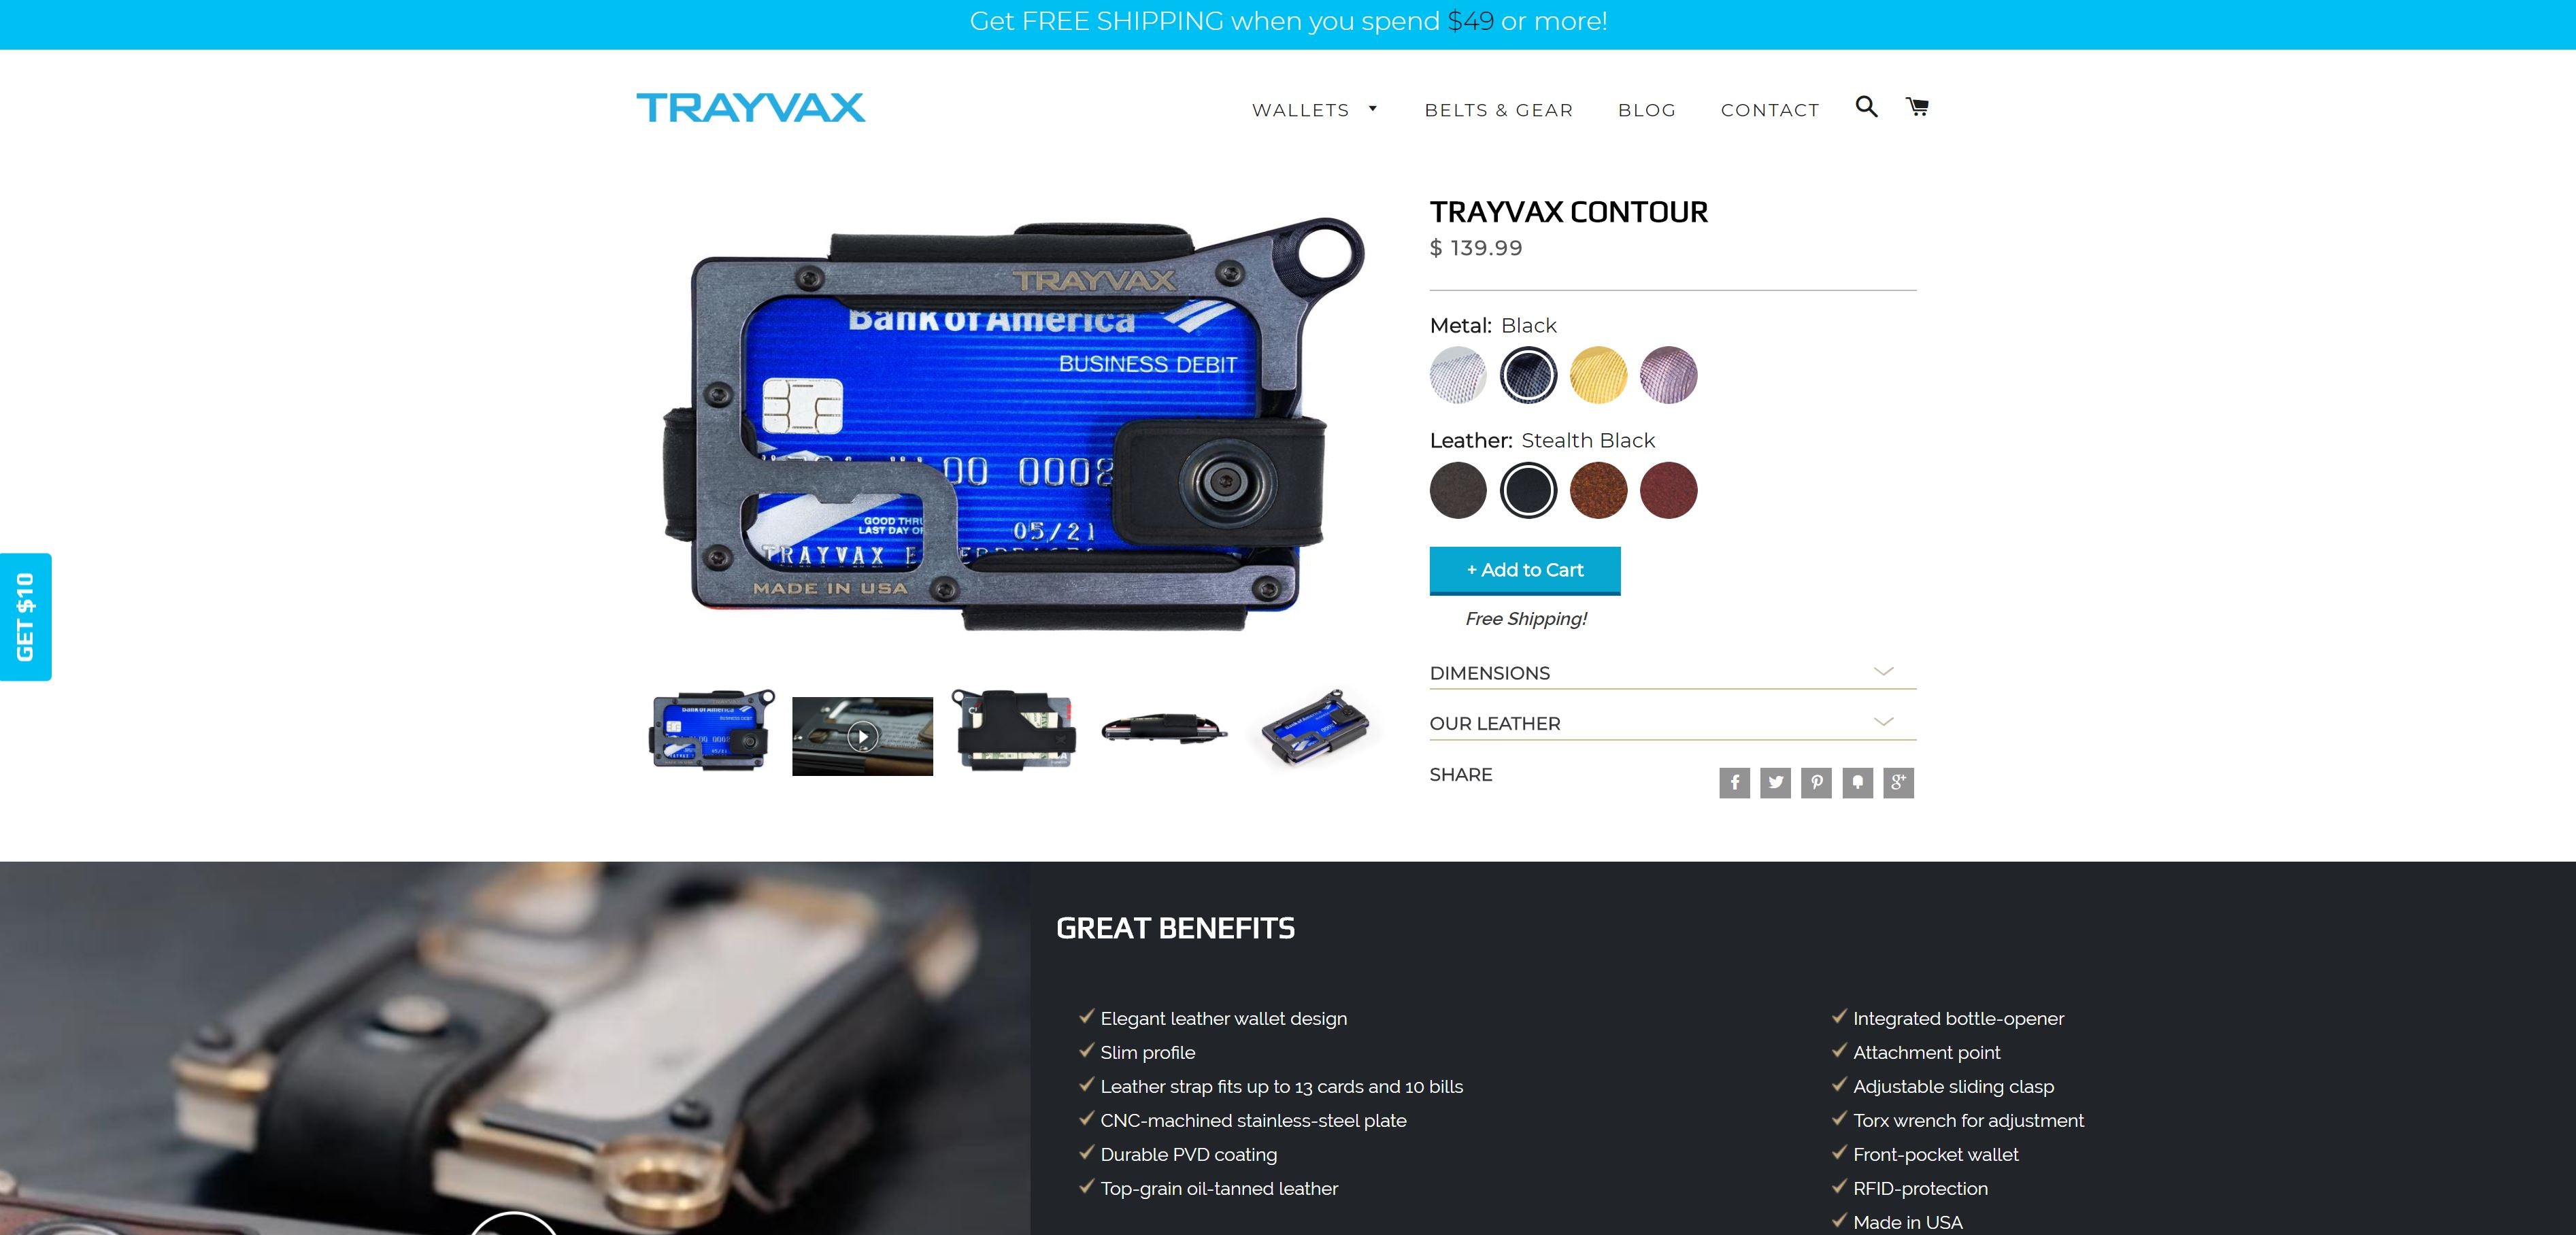 Trayvax.com Gets a Facelift Starting with the Contour